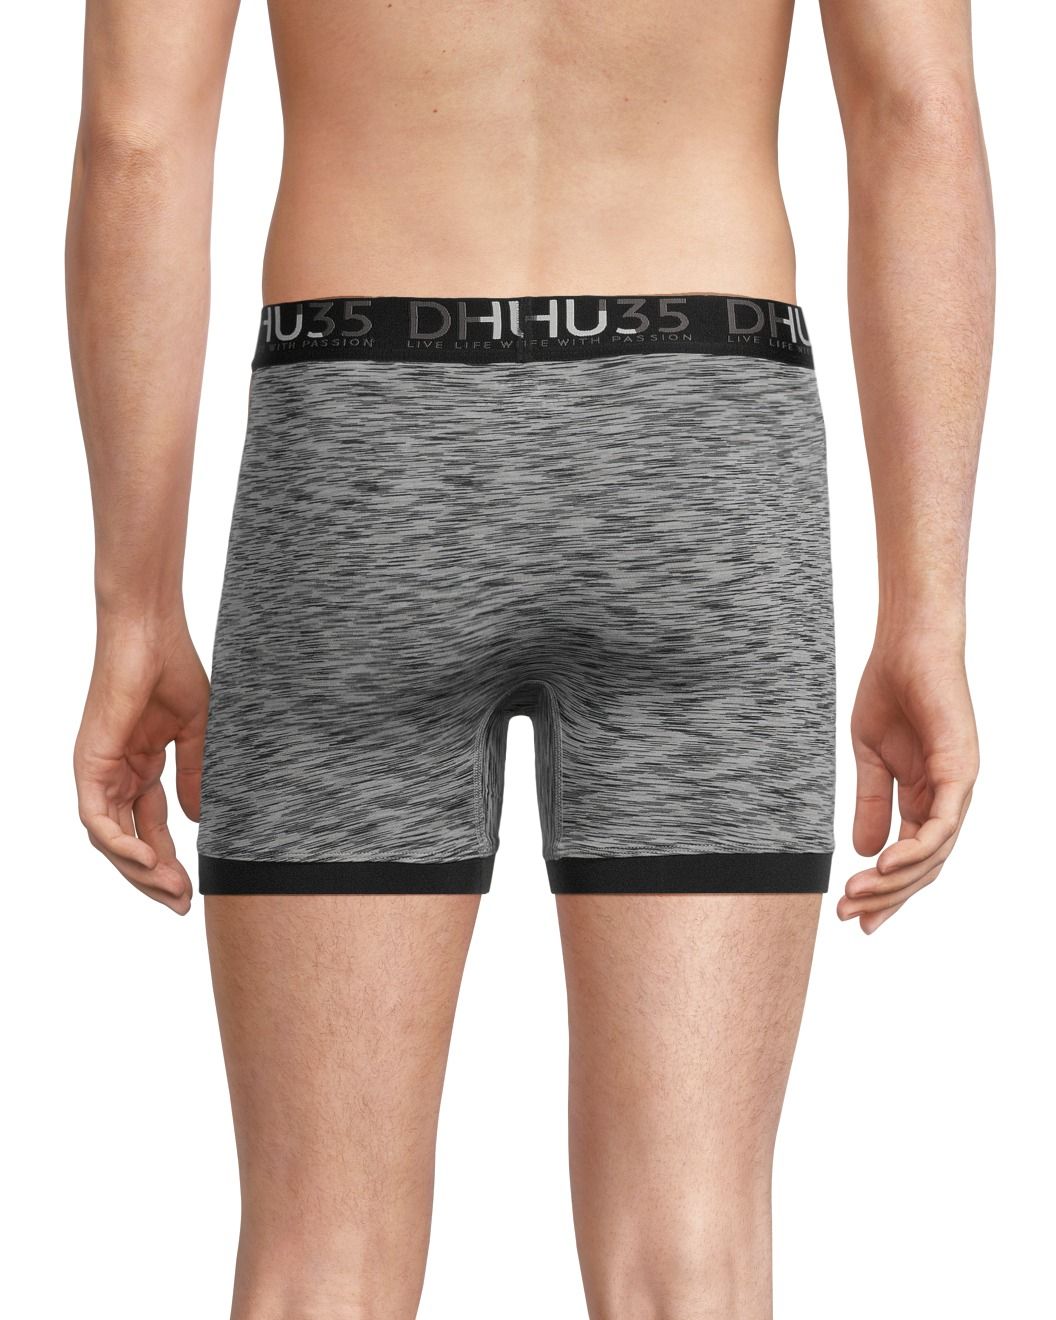 3-Pack Space-Dye Boxer Briefs